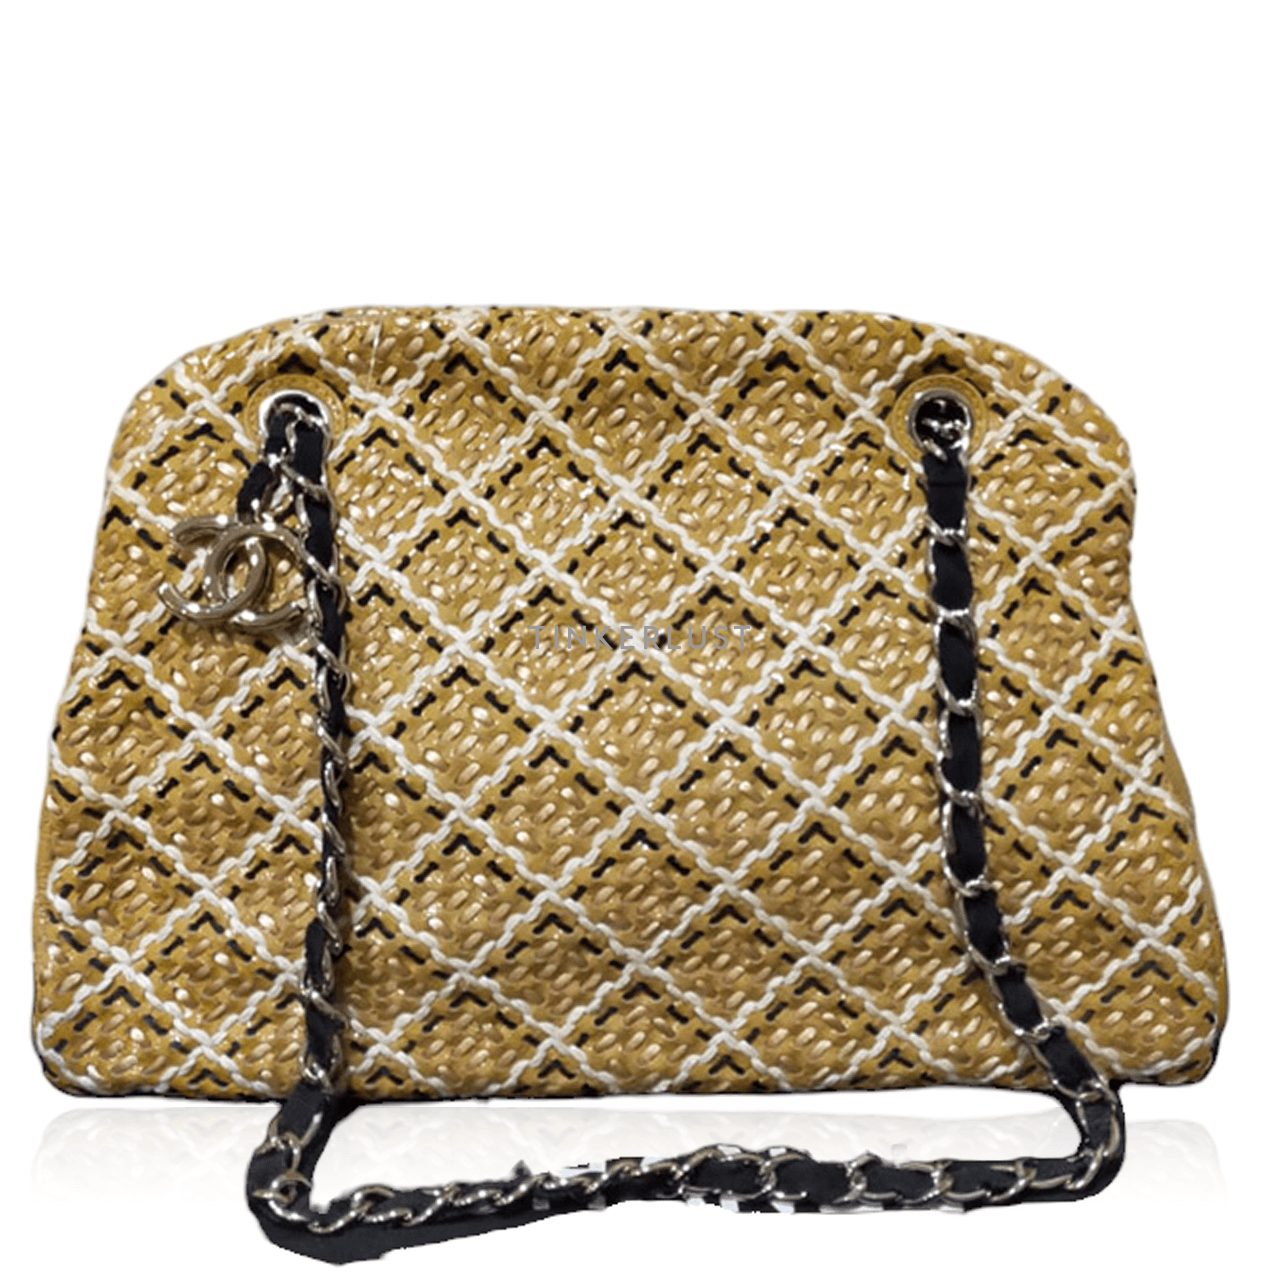 Chanel Mademoiselle Beige Woven Patent Leather Sticth Bowling #14